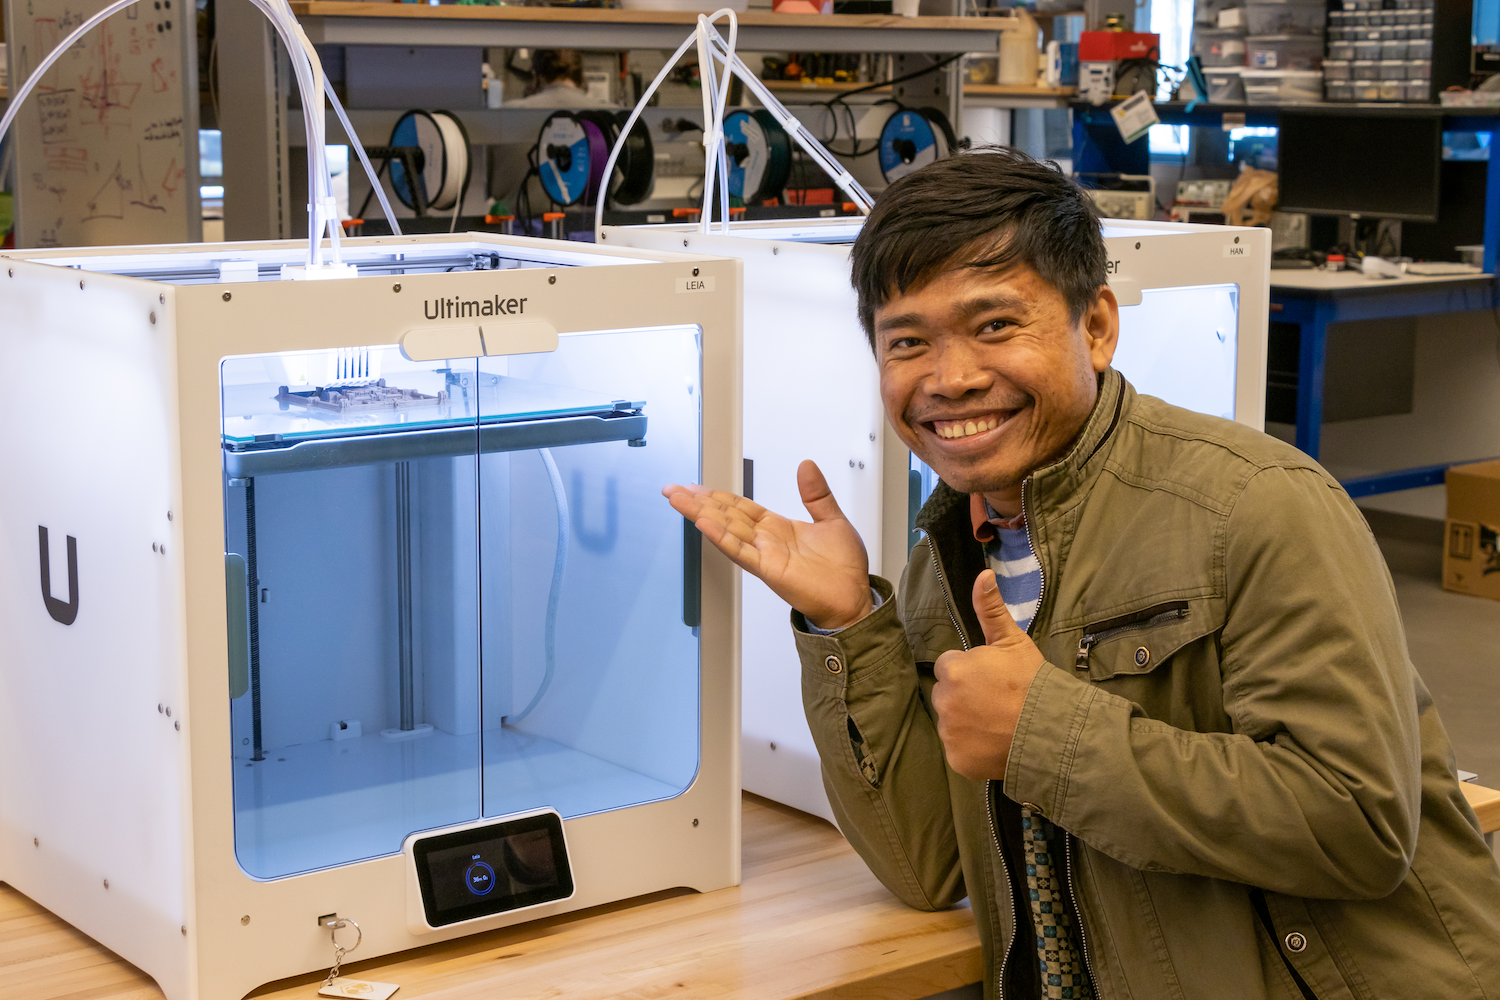 Kea smiling in front of 3d printing machine